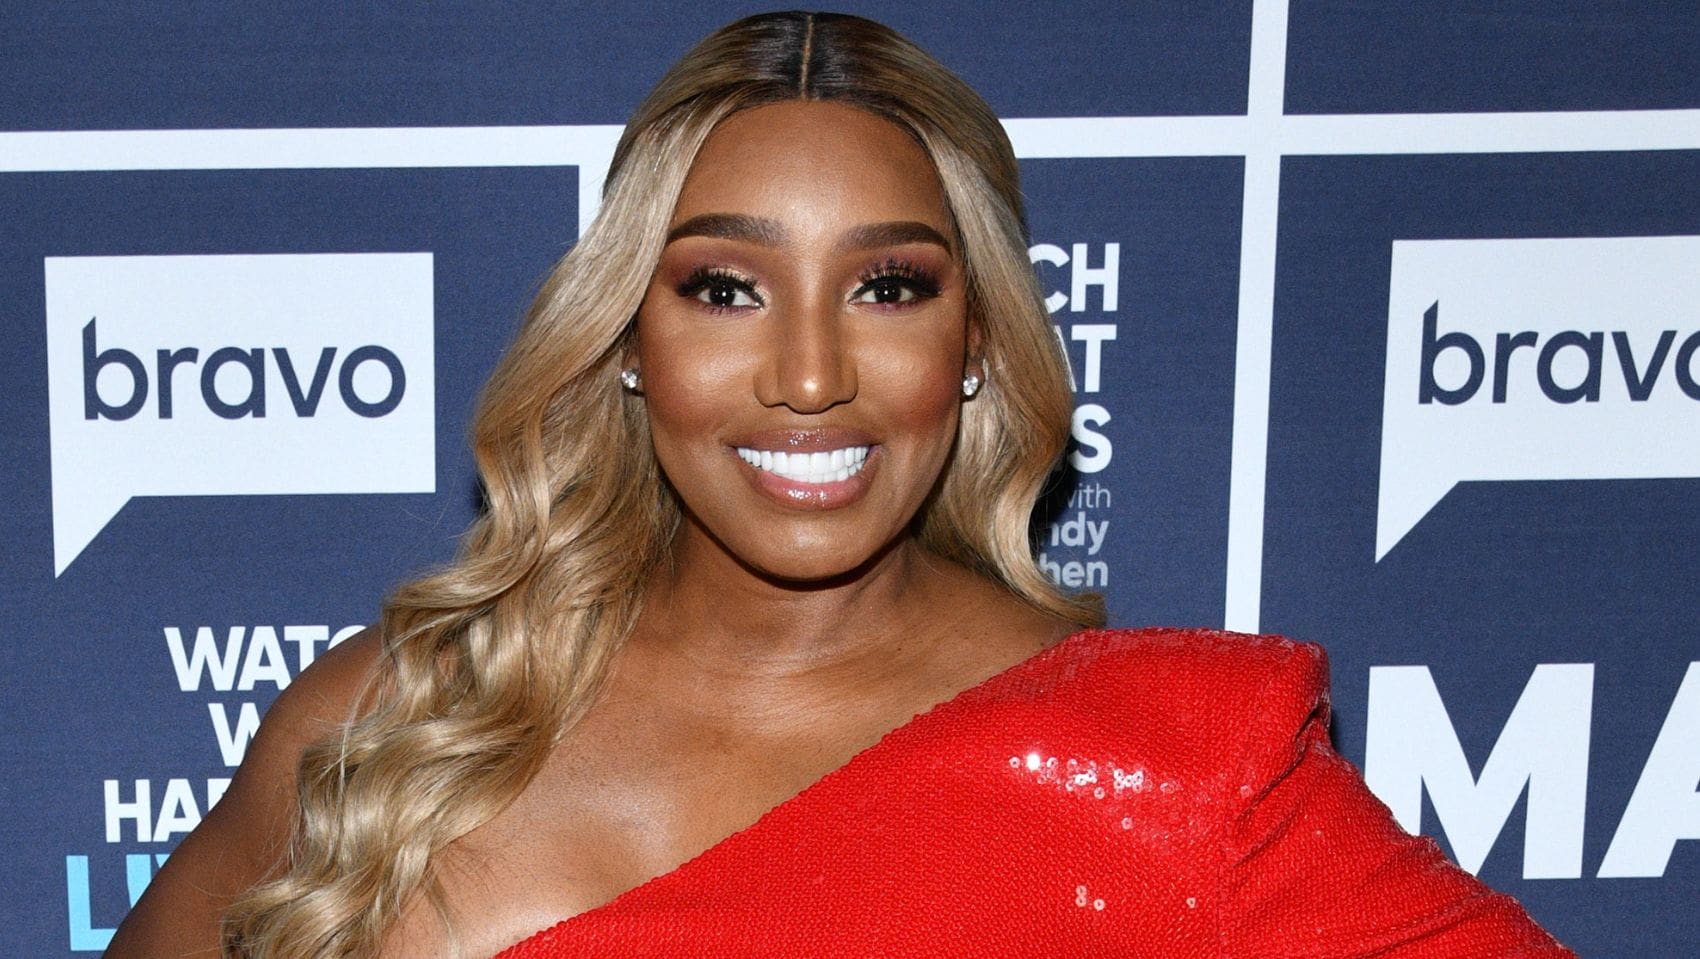 NeNe Leakes Is Staying Safe And Fashionable - Check Out Her Latest Look